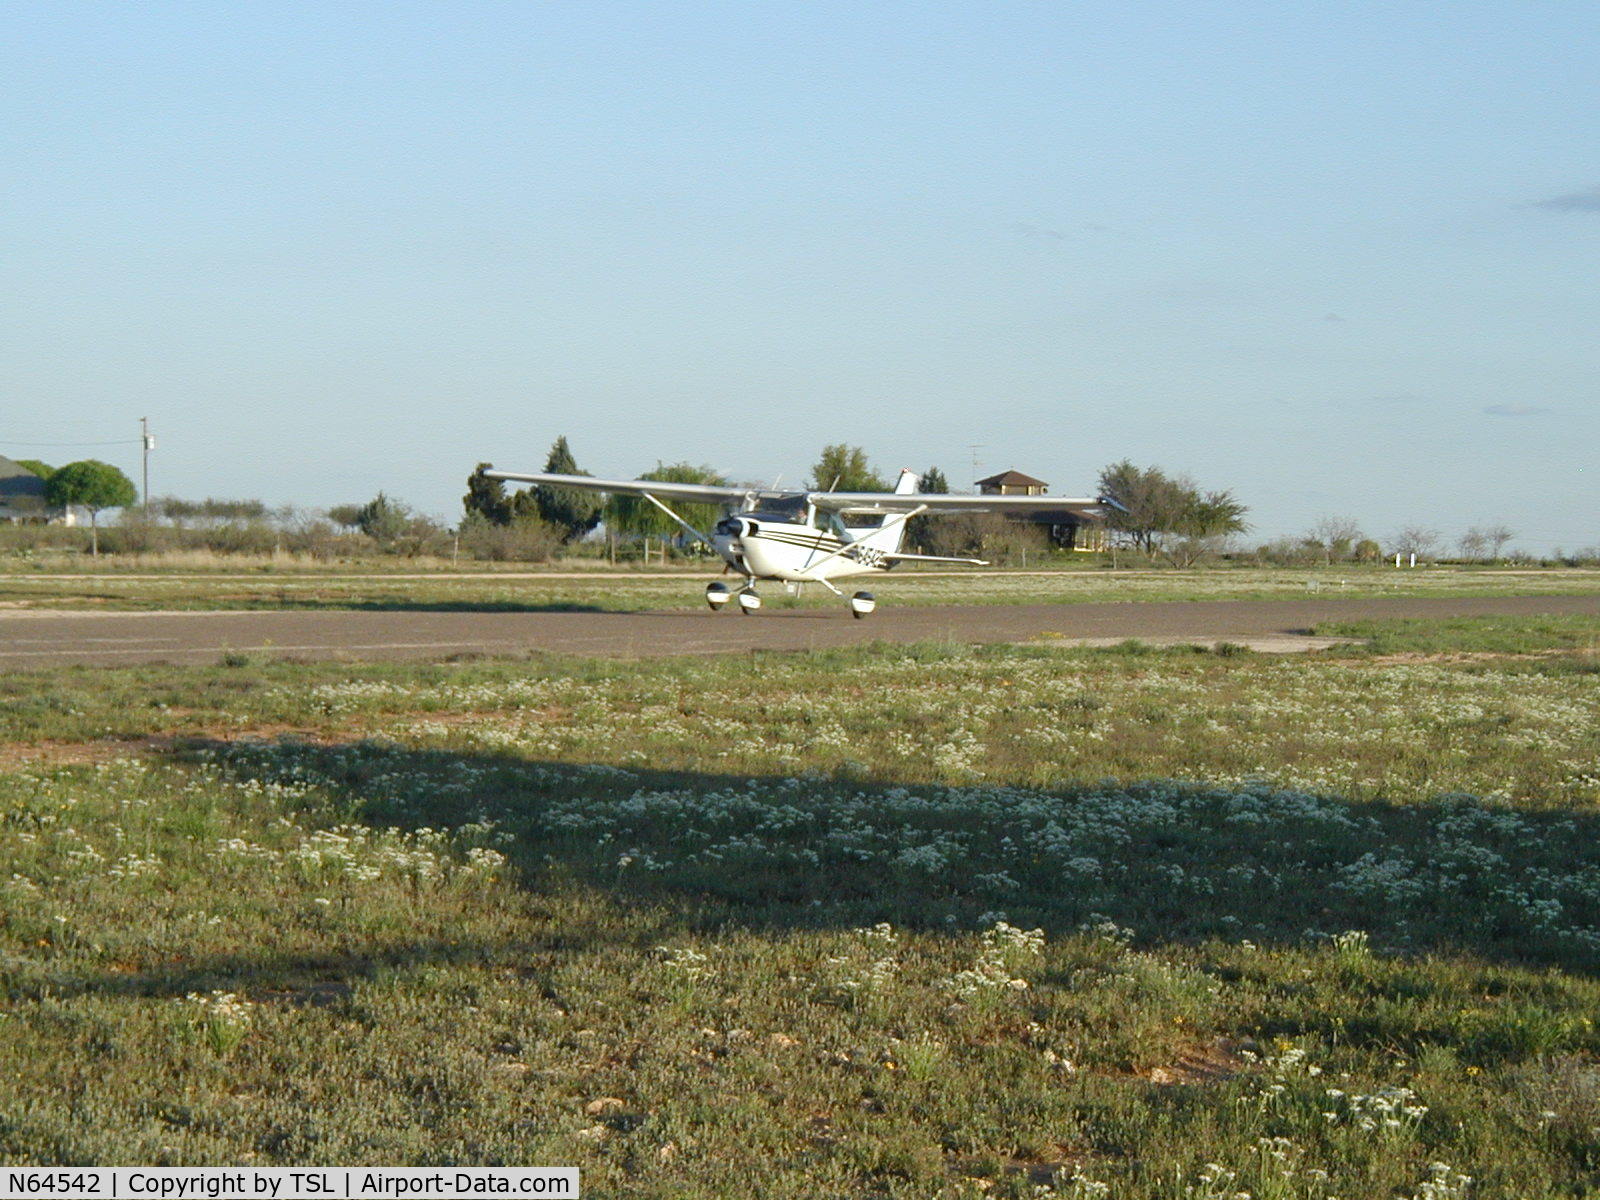 N64542, 1975 Cessna 172M C/N 17265296, N64542 carries a student on his 1st solo landing